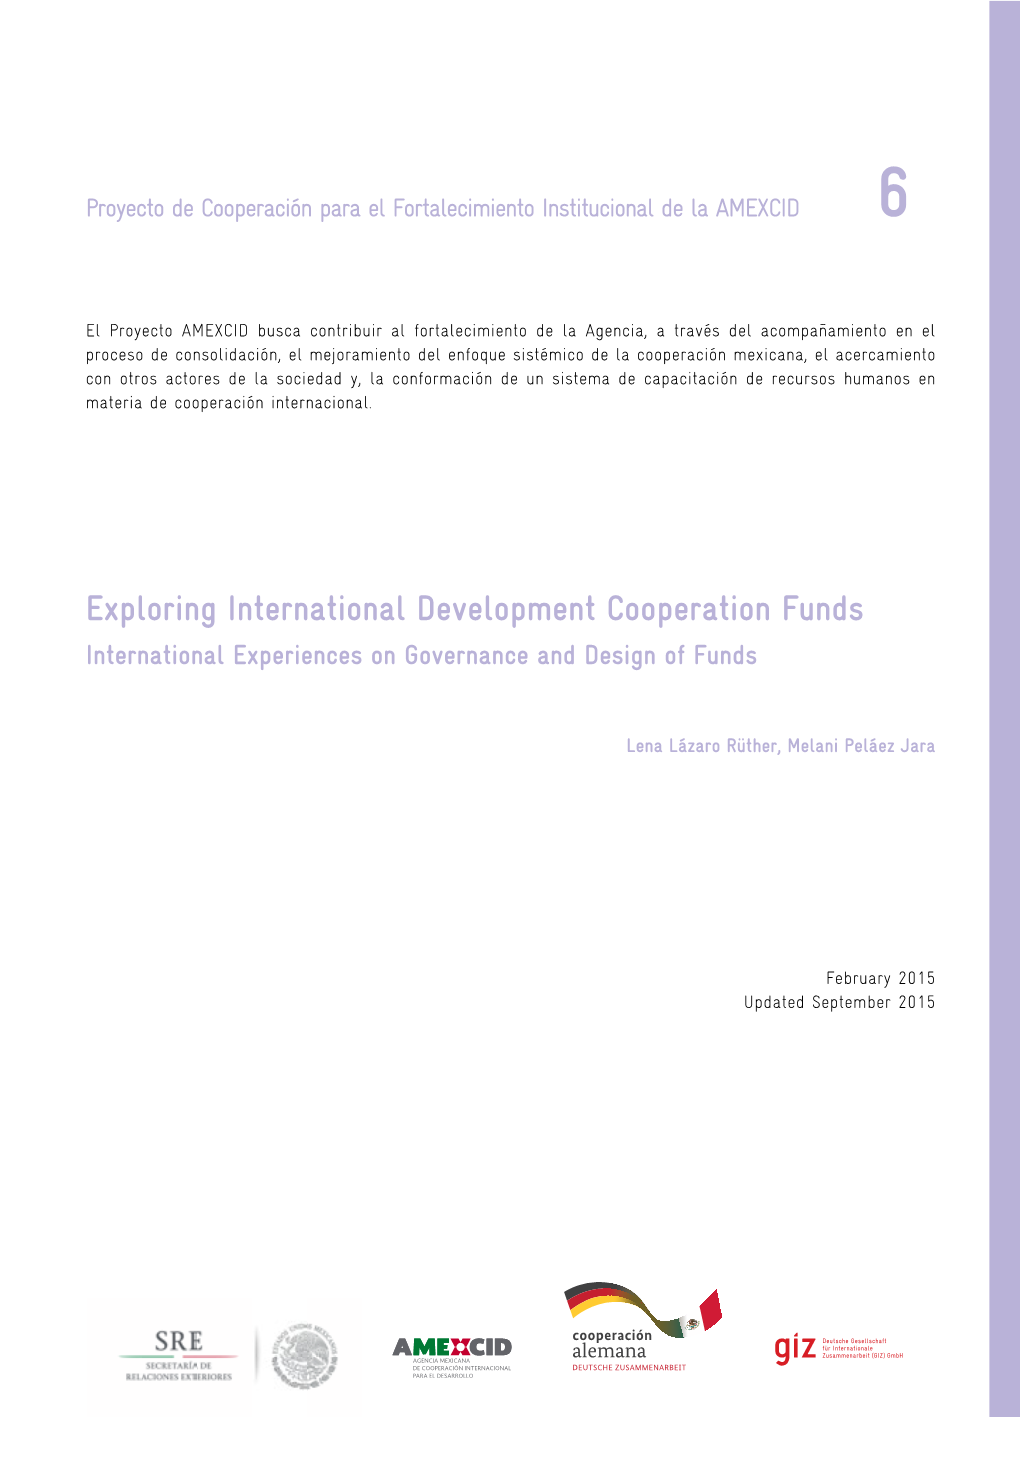 Exploring International Development Cooperation Funds International Experiences on Governance and Design of Funds